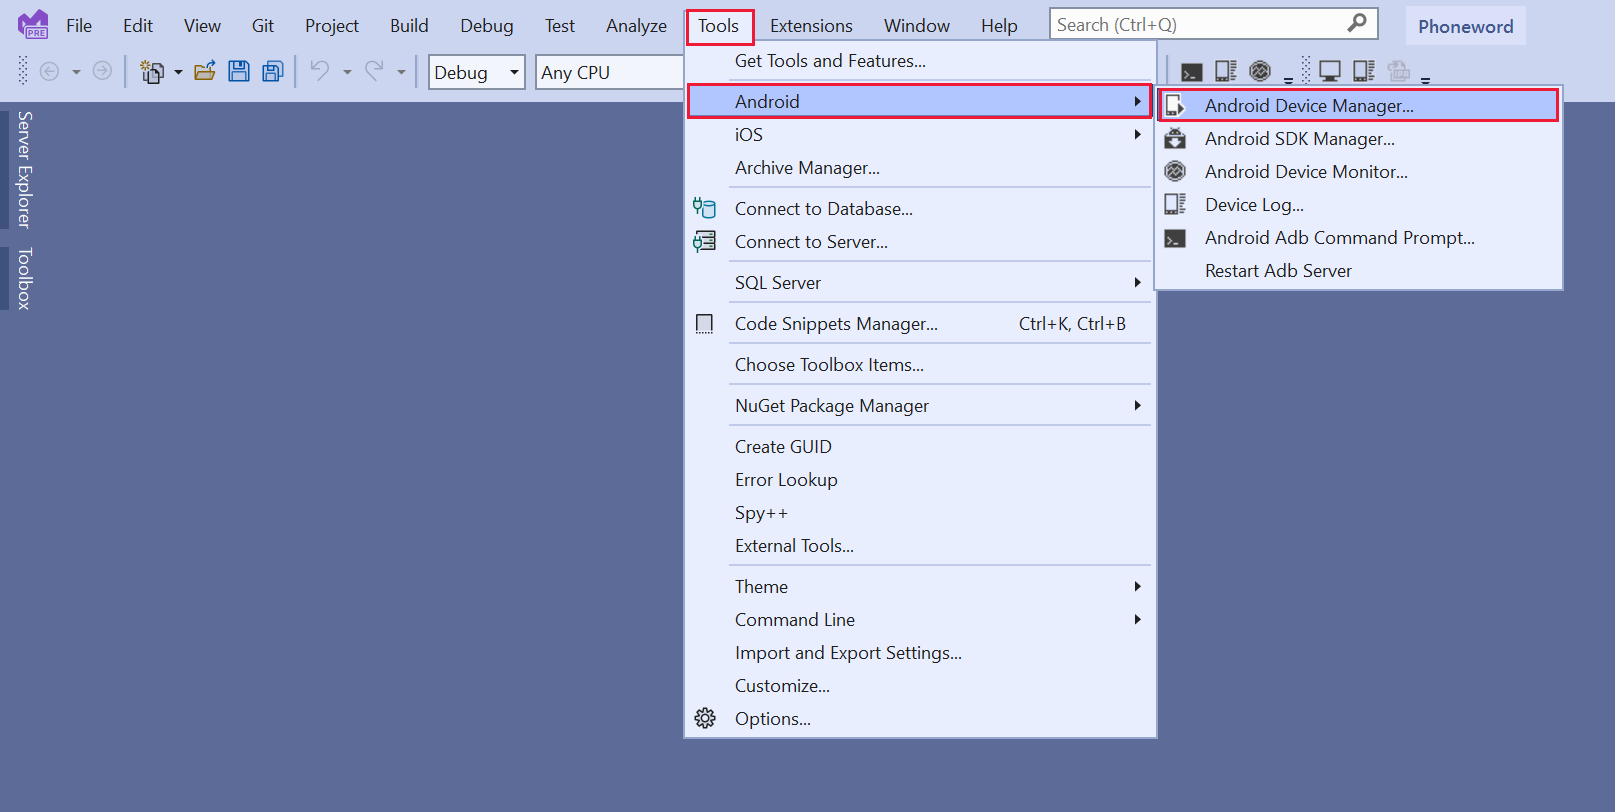 A screenshot of the Visual Studio tools menu. The user has selected the Android Device Manager option.